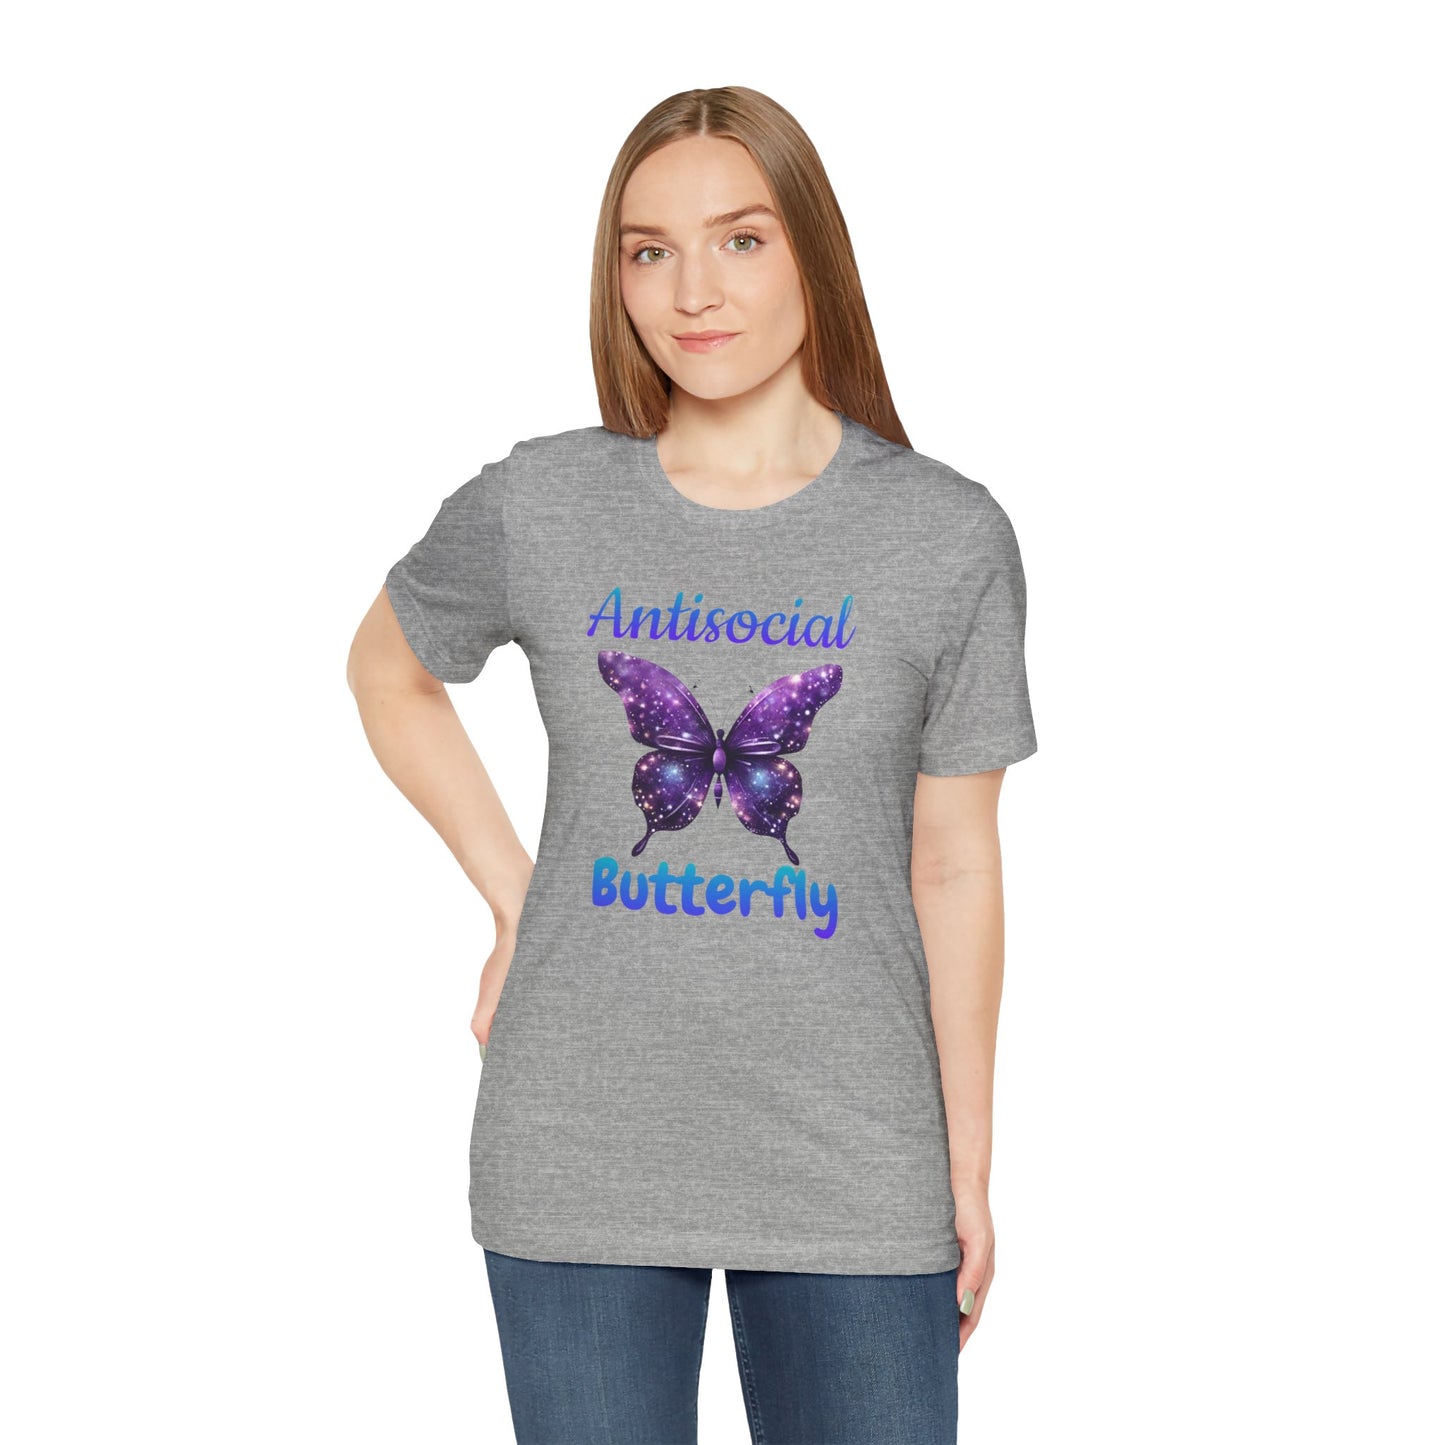 Antisocial Butterfly woman's tshirt, homebody shirt, introvert tshirt, butterfly mom shirt, anti social moms, social anxiety shirt, gifts